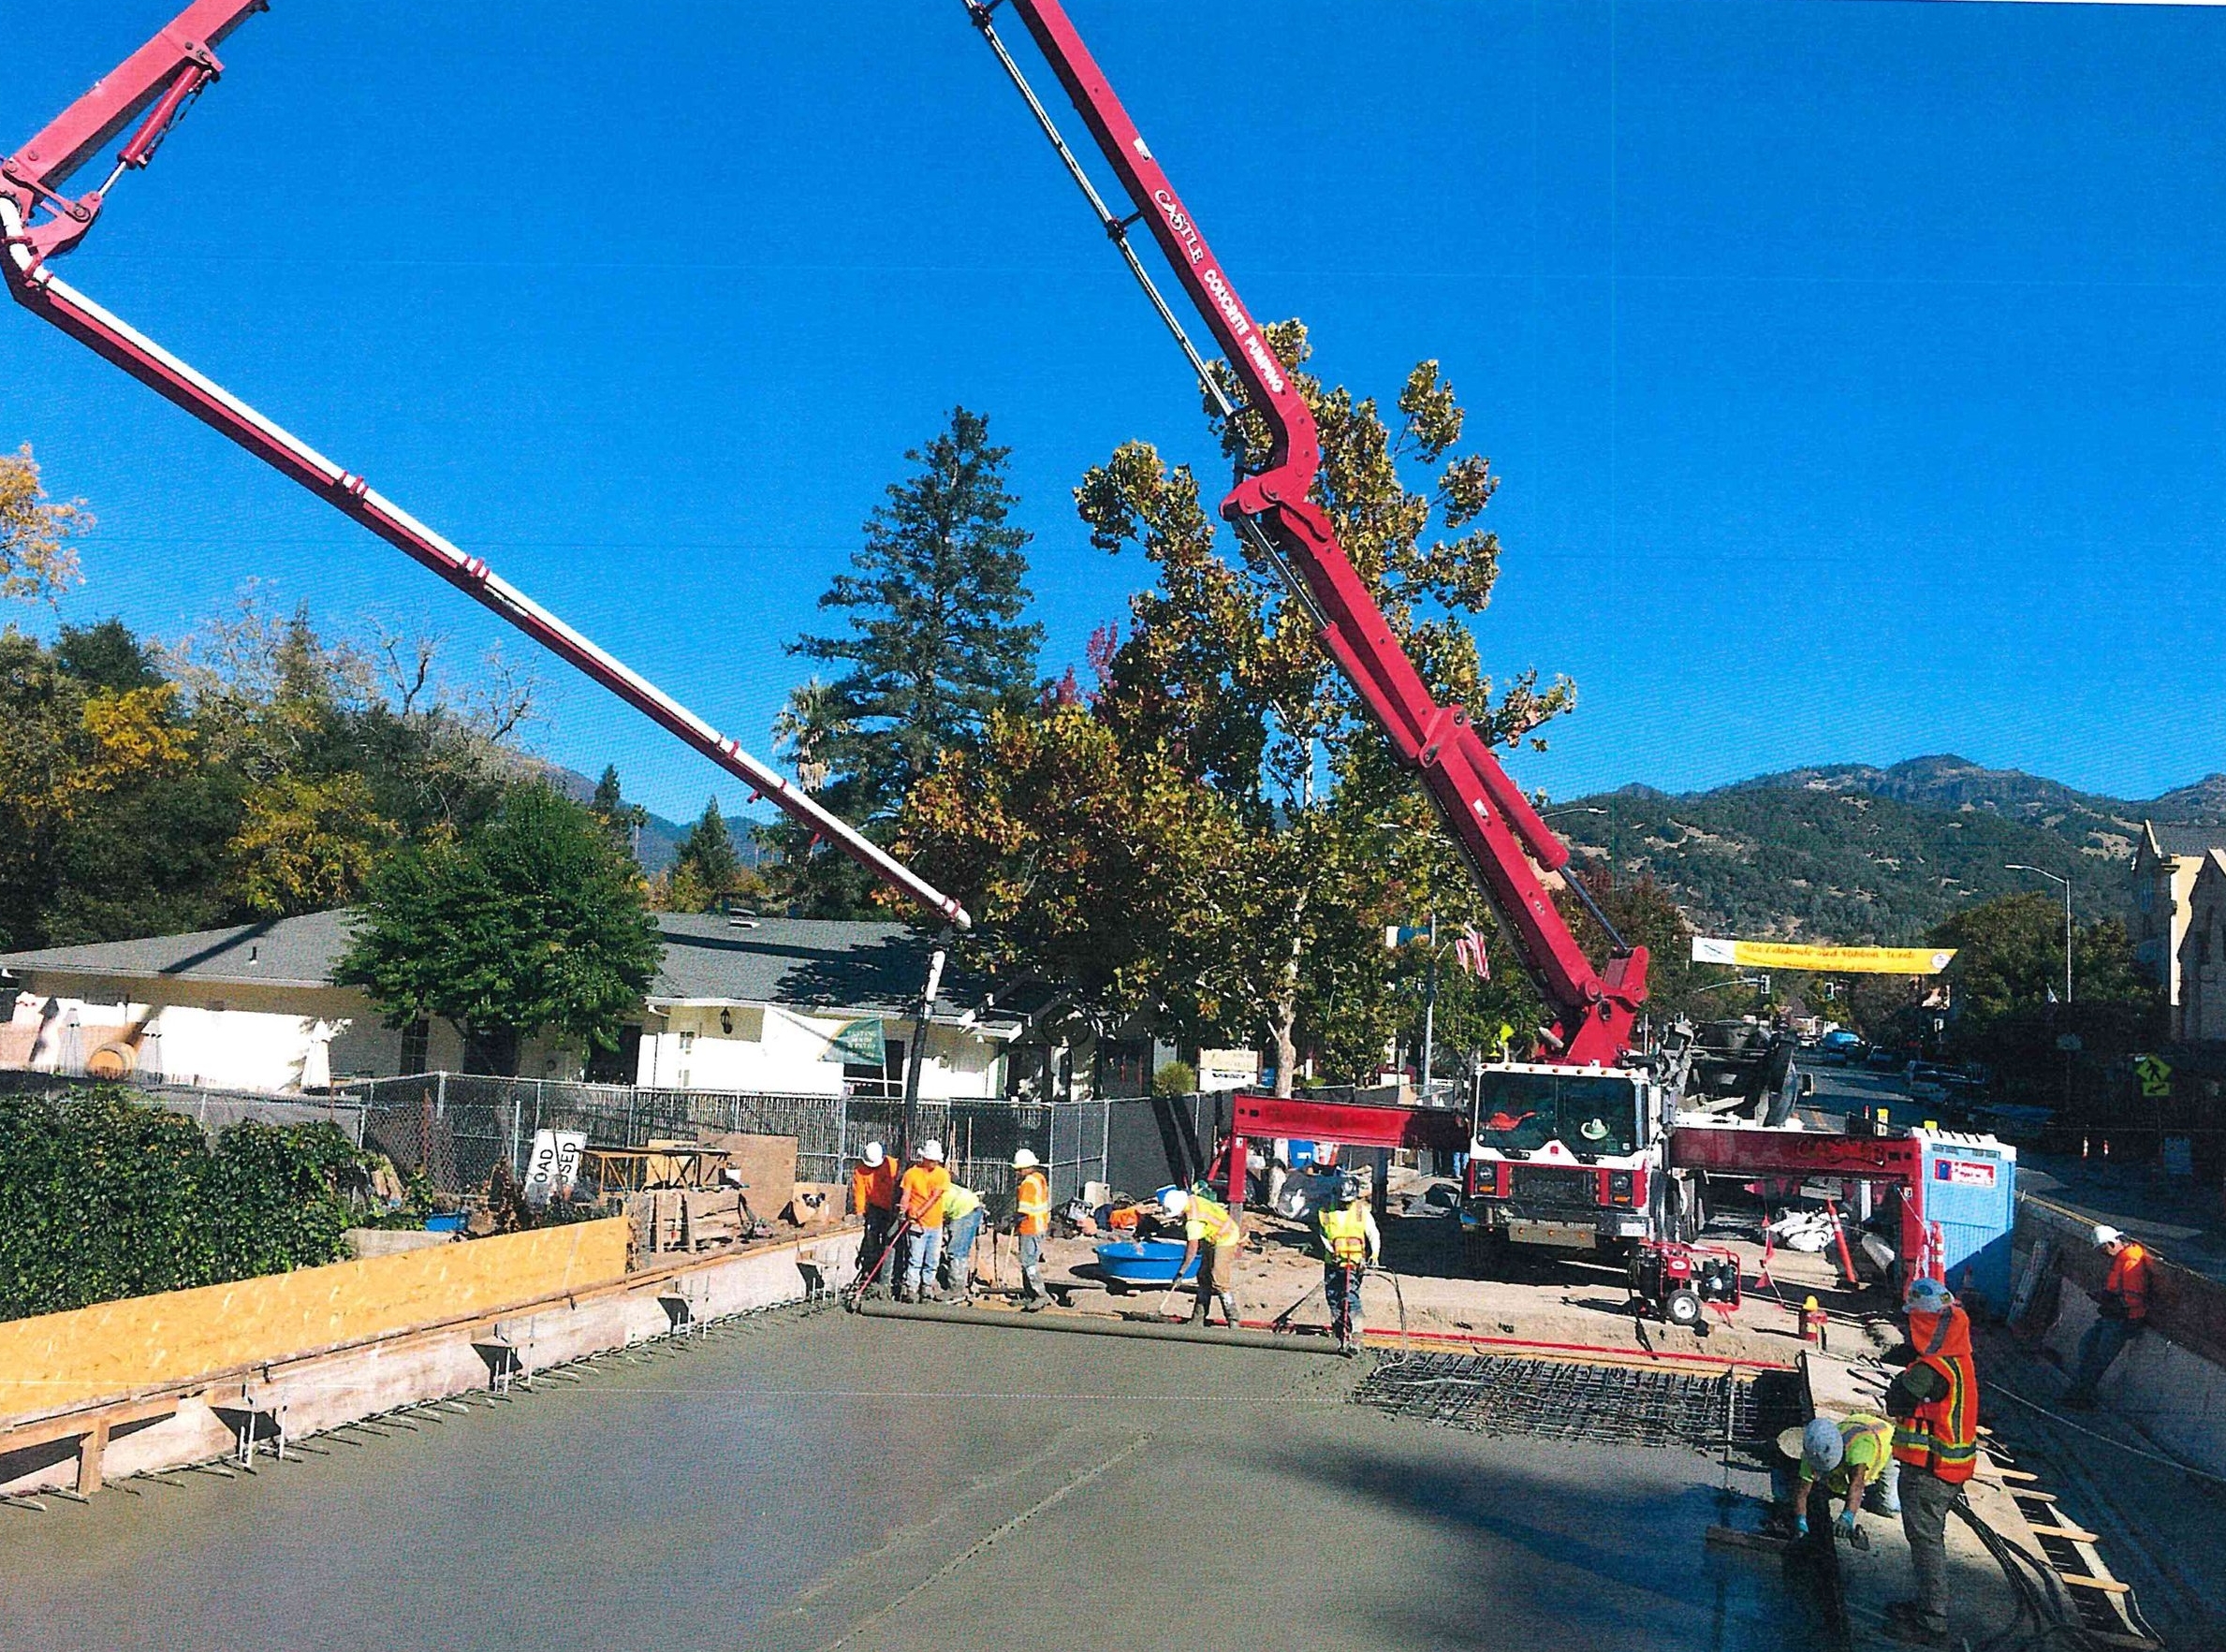   Welcome To Valentine Corporation   Project: Calistoga Napa River Bridge  If It's Difficult Or Unusual, Call Us!   Contact Us  